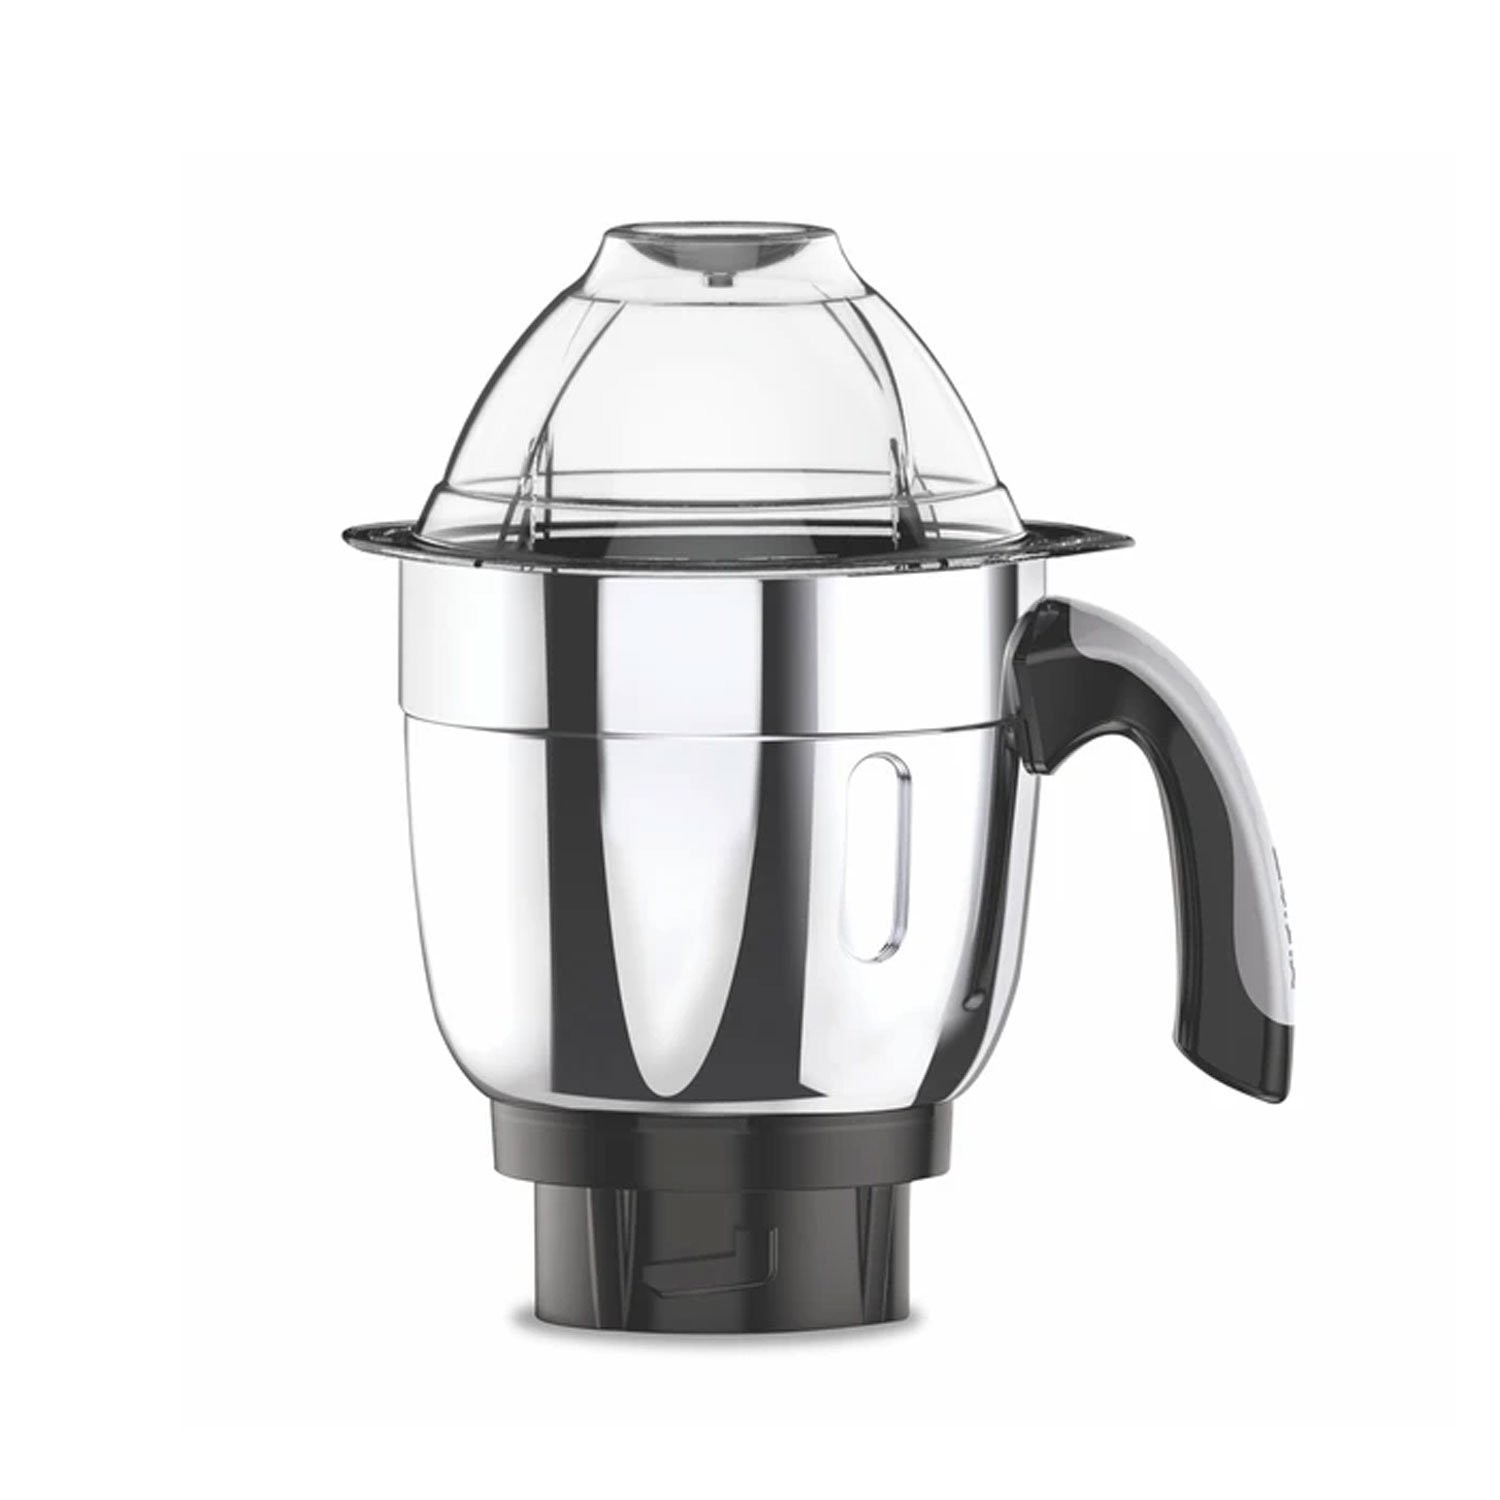 vidiem-eva-nero-650w-stainless-steel-jars-indian-mixer-grinder-spice-coffee-grinder-110v-for-use-in-canada-usa